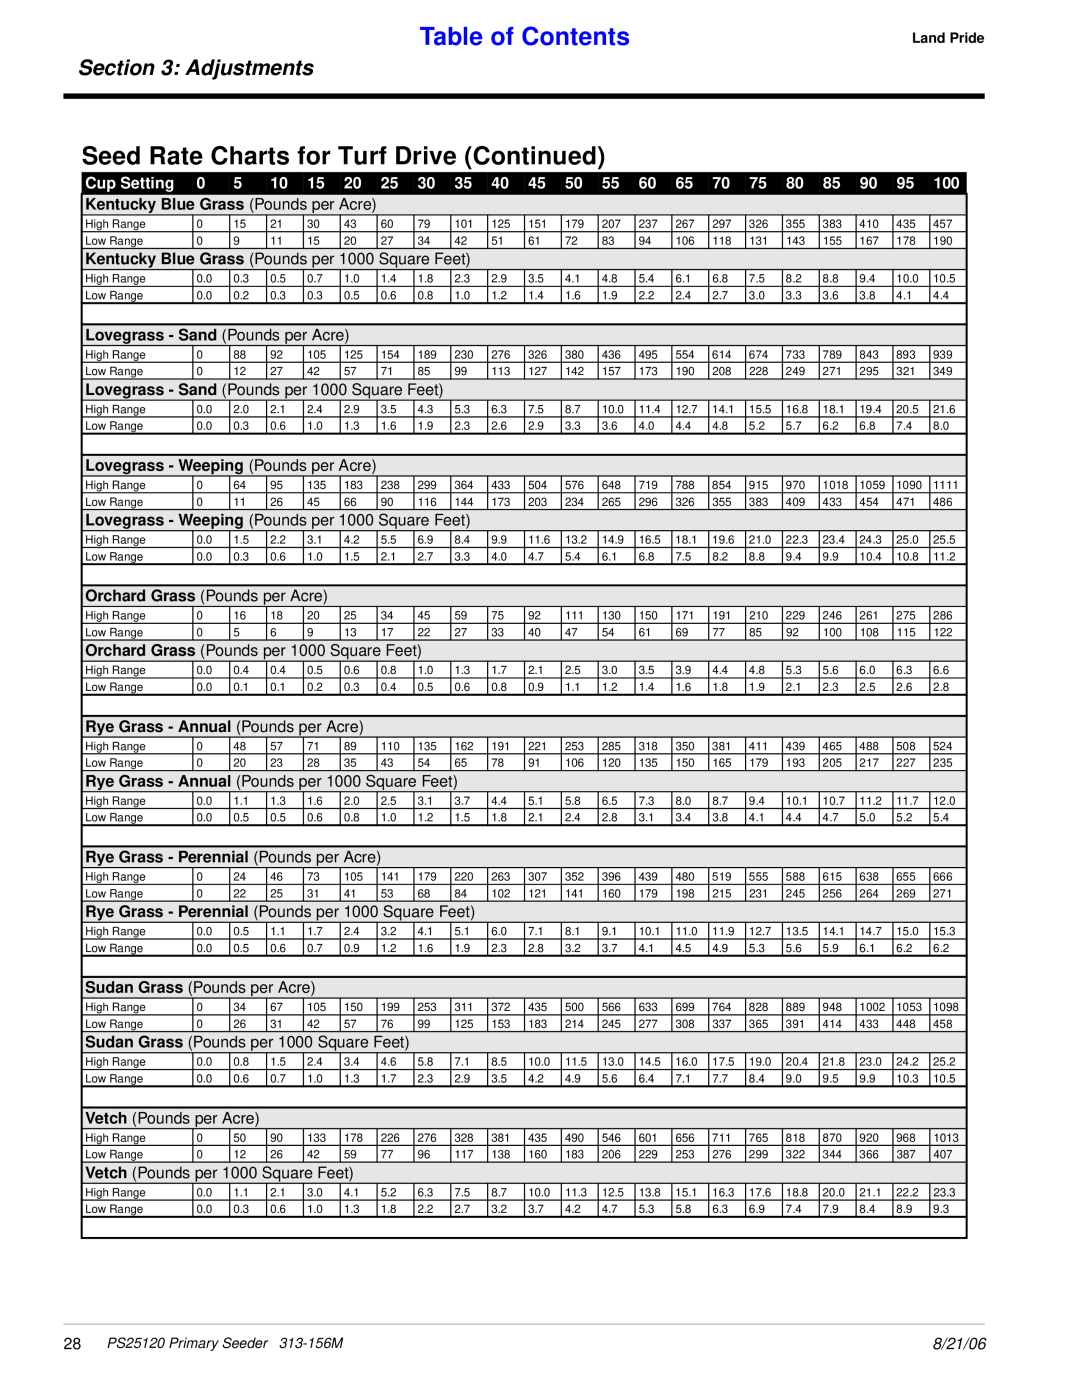 Land Pride PS25120 manual Seed Rate Charts for Turf Drive Continued, Table of Contents, Adjustments, 8/21/06 